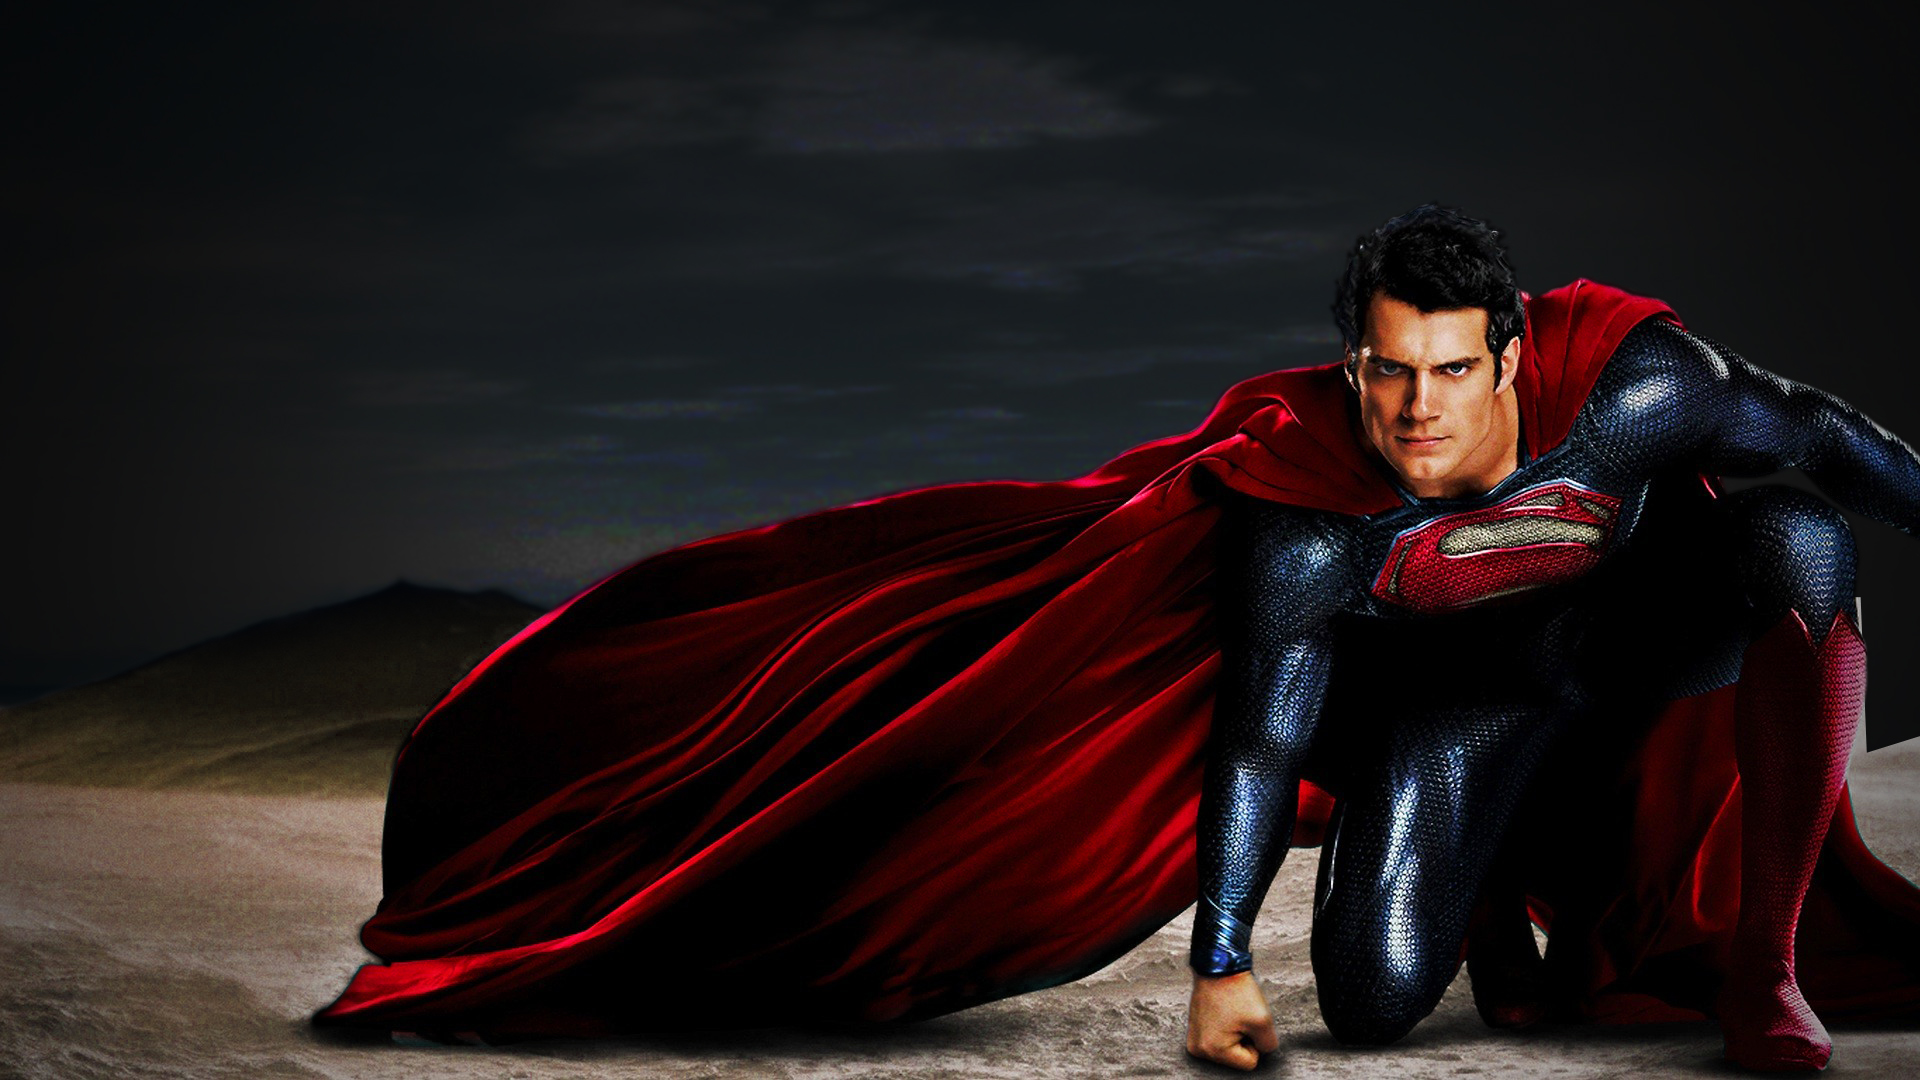  on August 20 2015 By Stephen Comments Off on Man of Steel Wallpapers